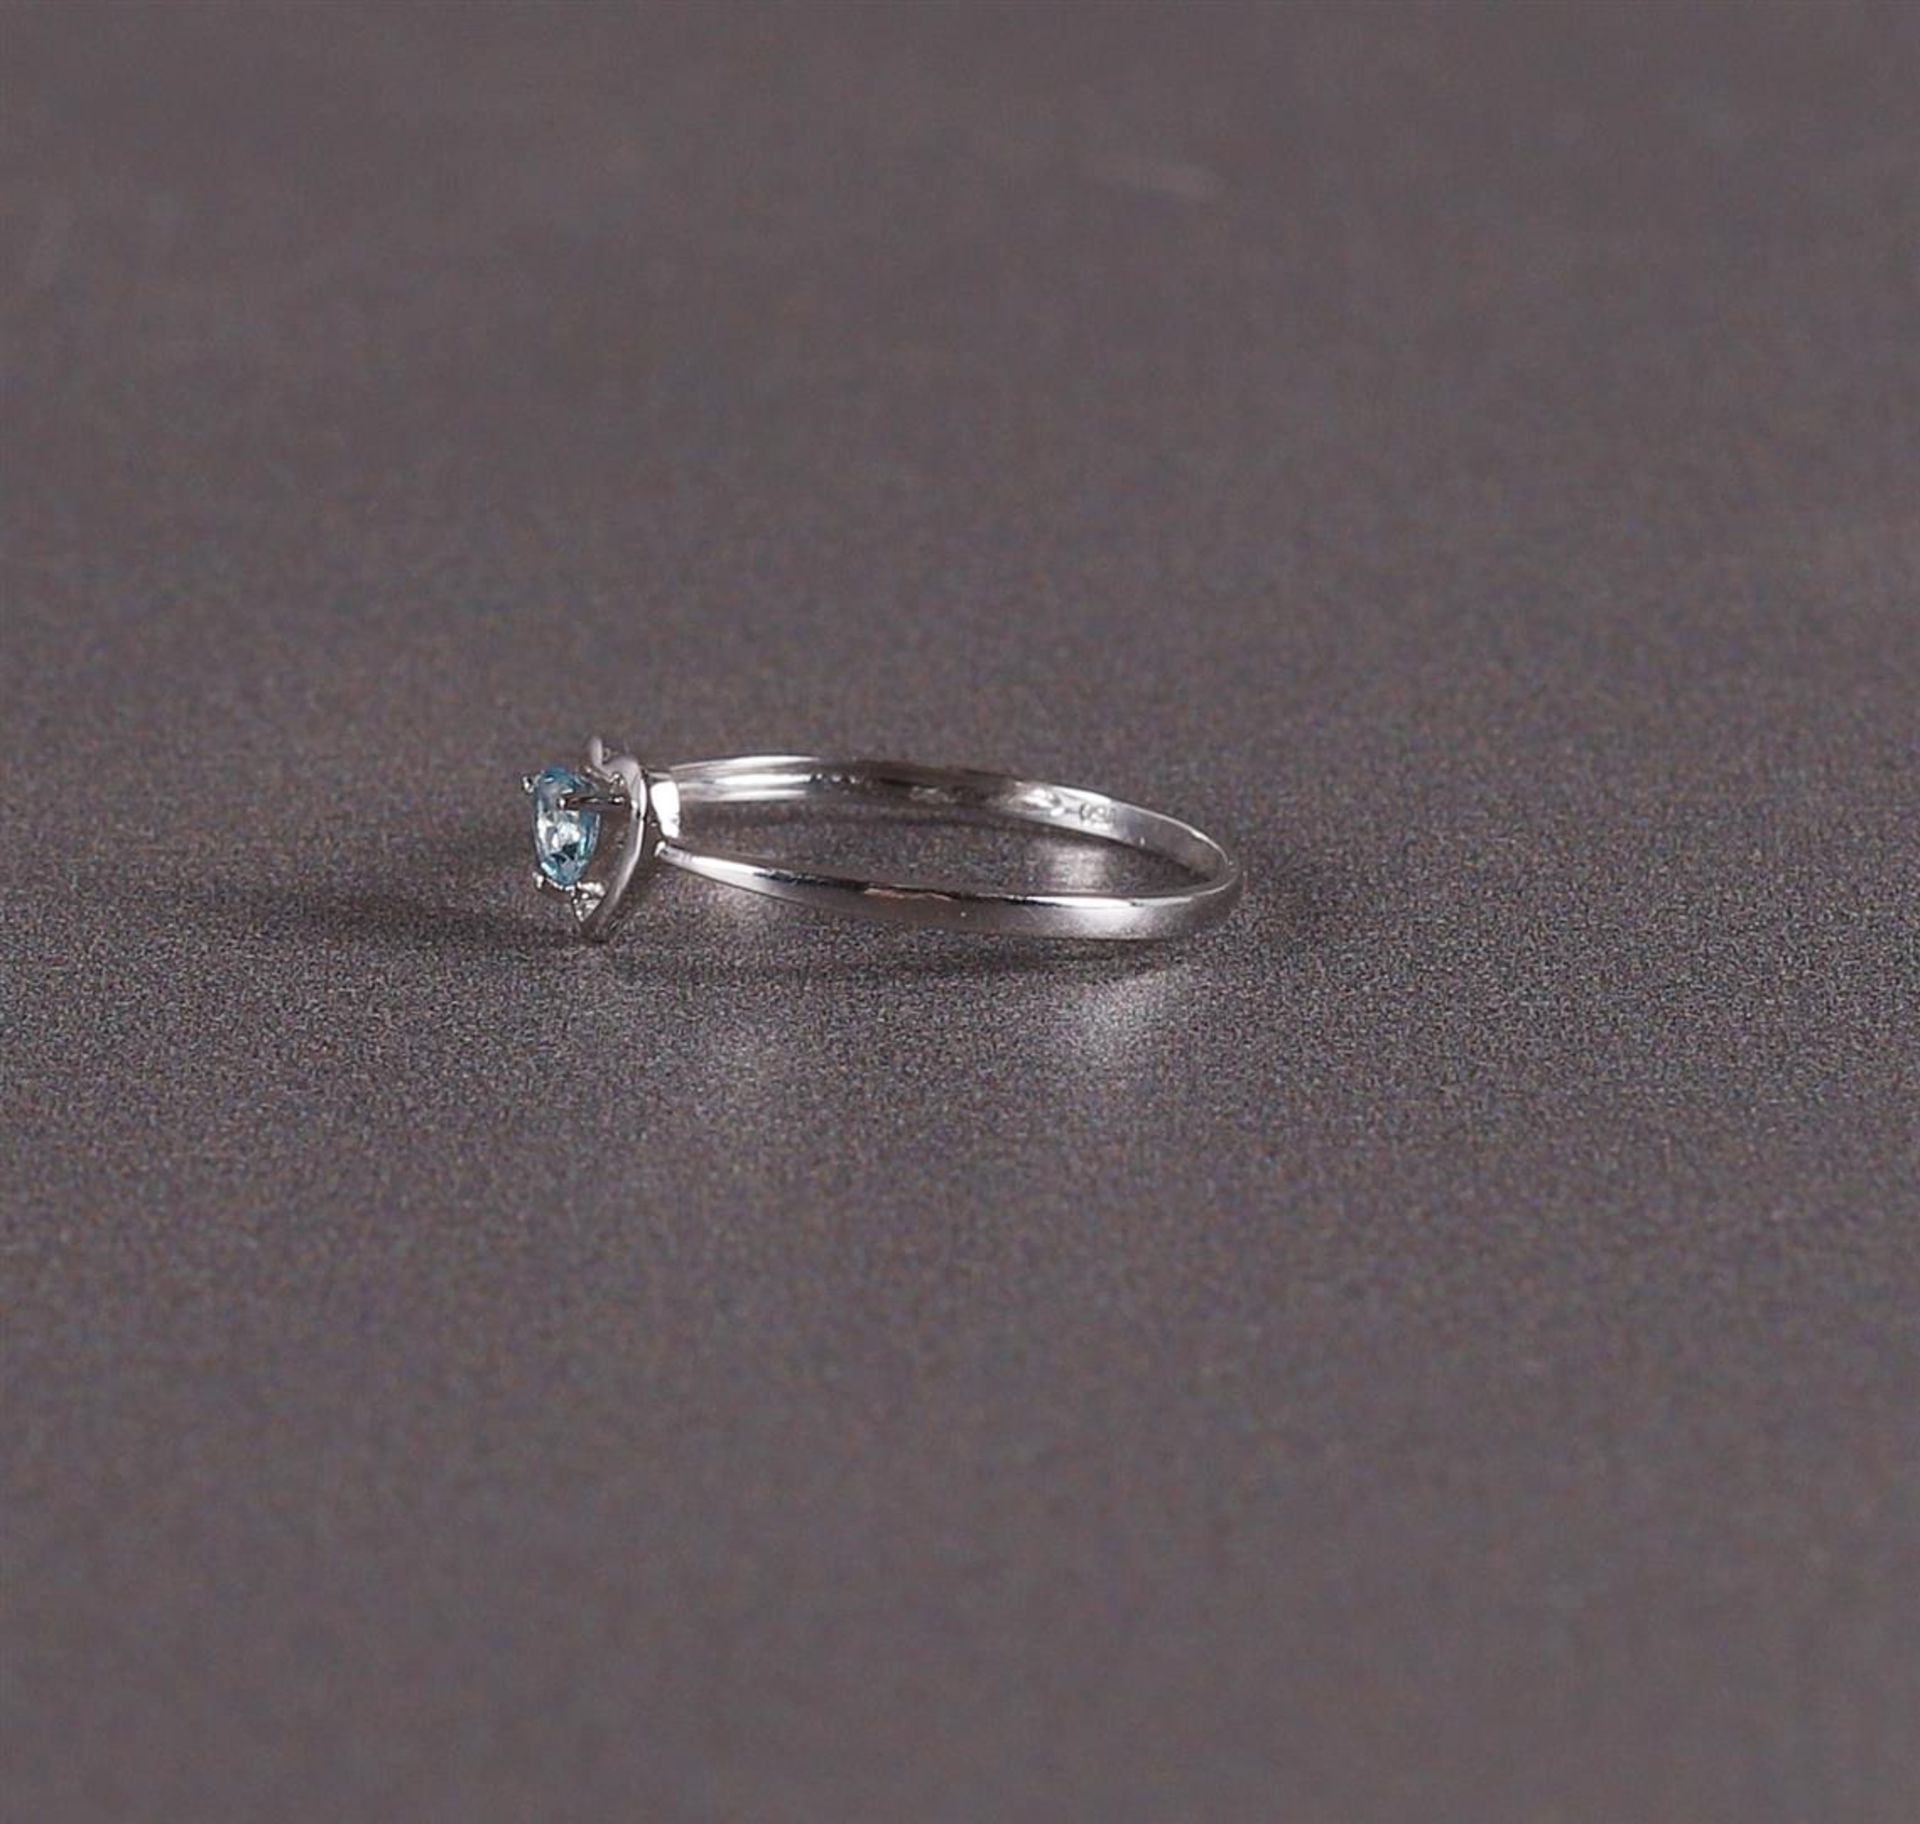 An 18 kt gold ring with a heart-shaped cut aquamarine - Image 2 of 2